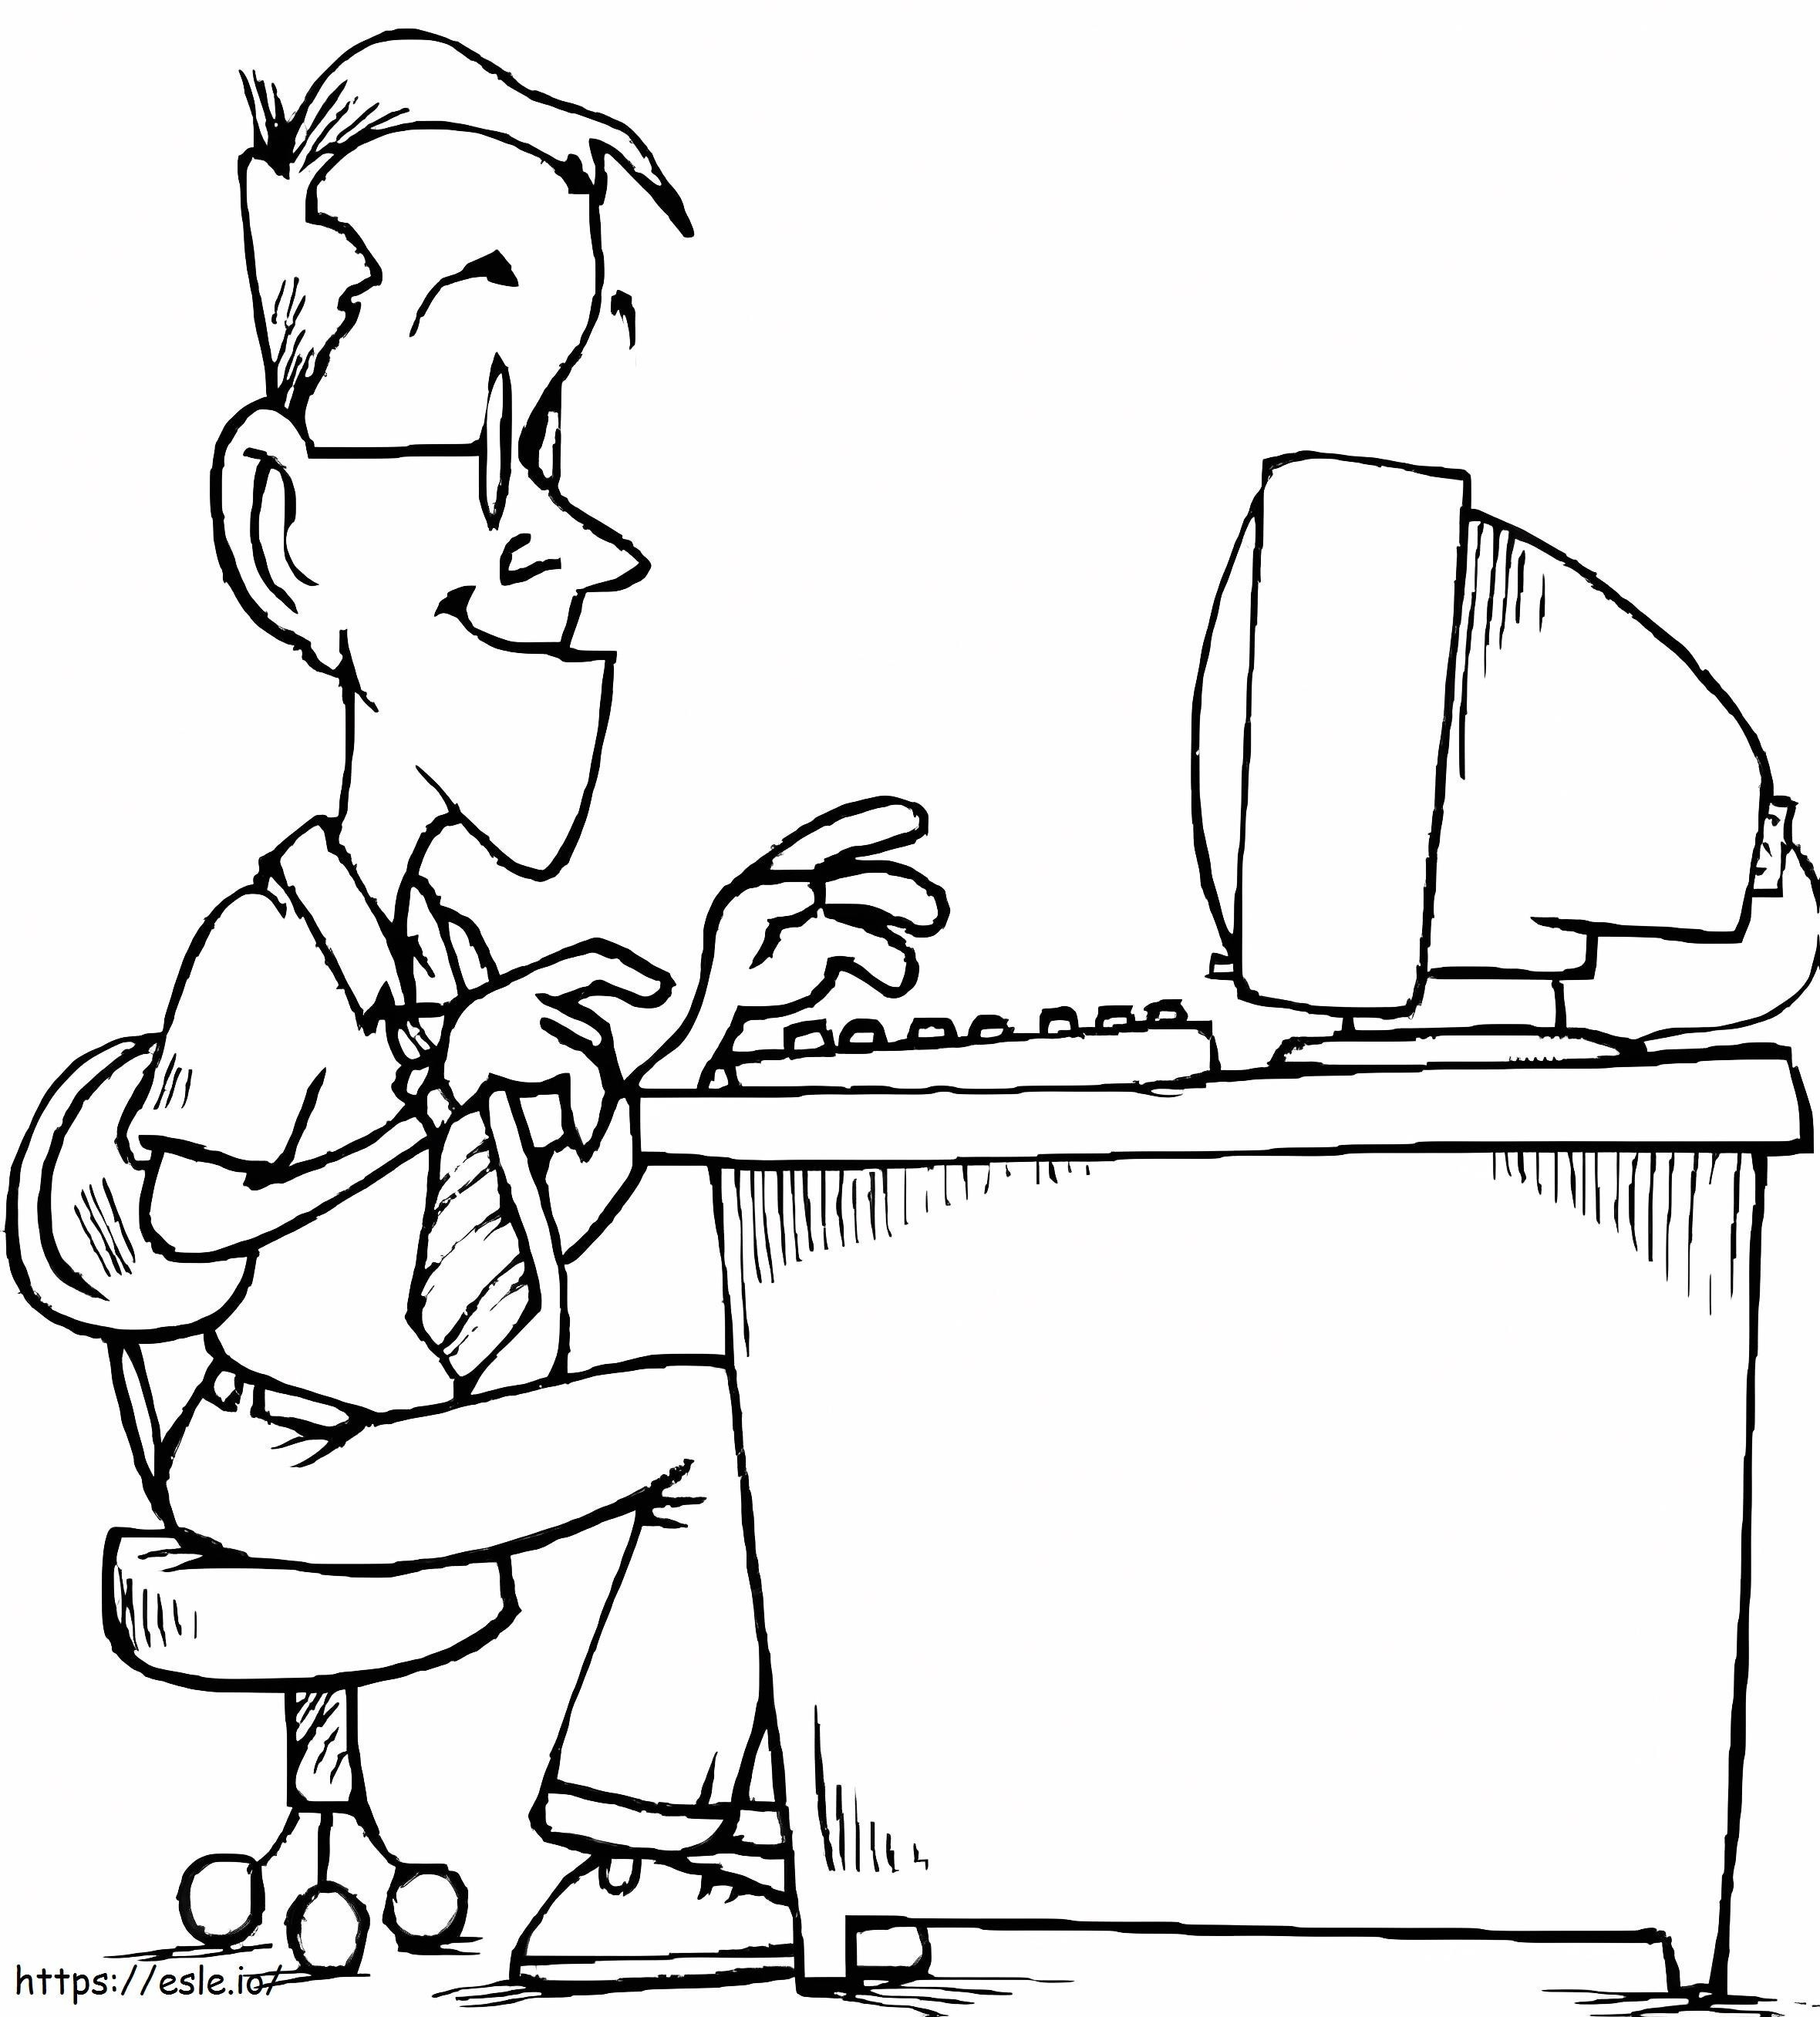 Man With Computer coloring page